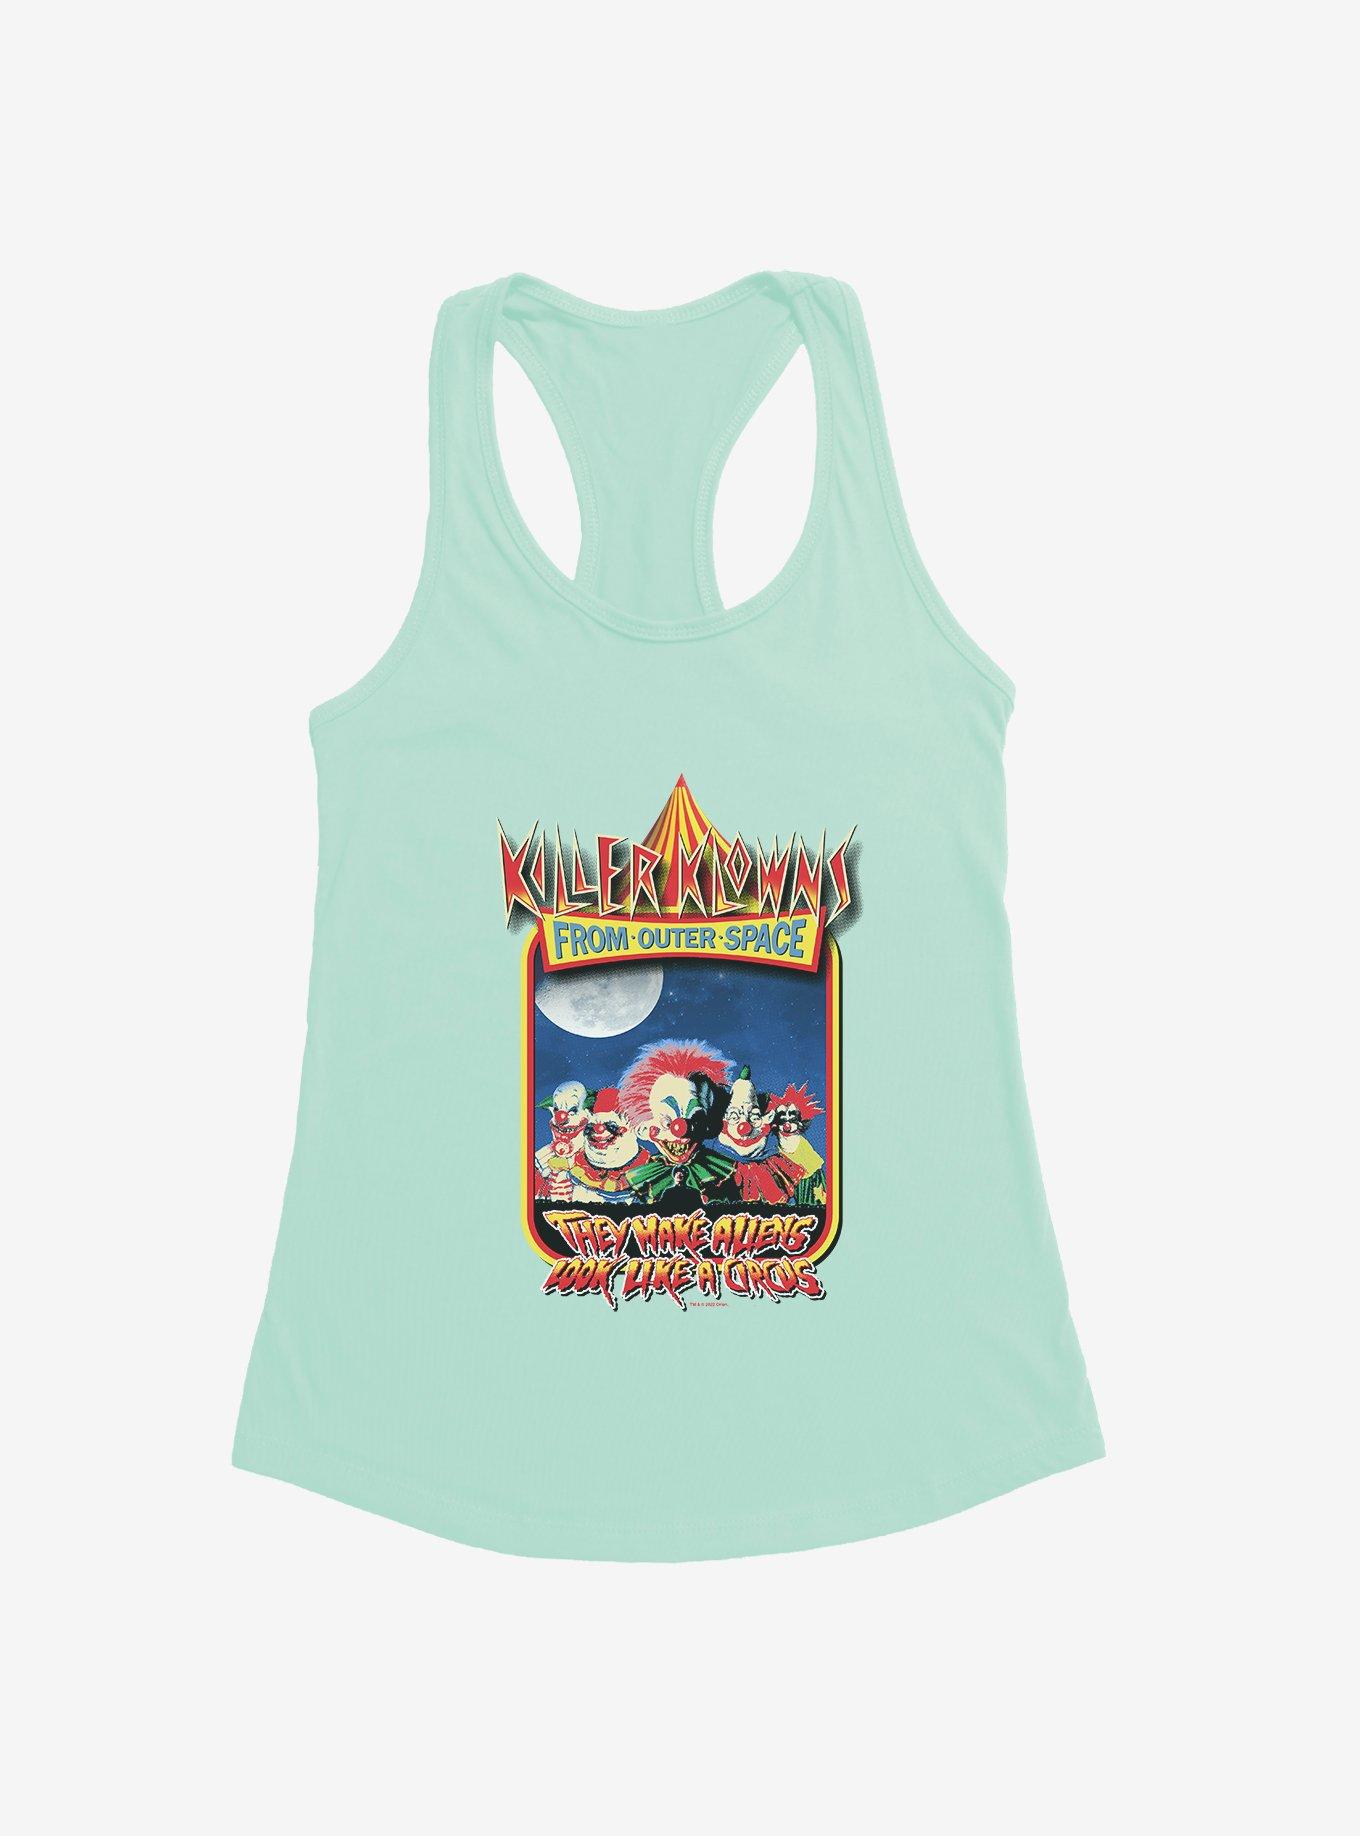 Killer Klowns From Outer Space Movie Poster Girls Tank